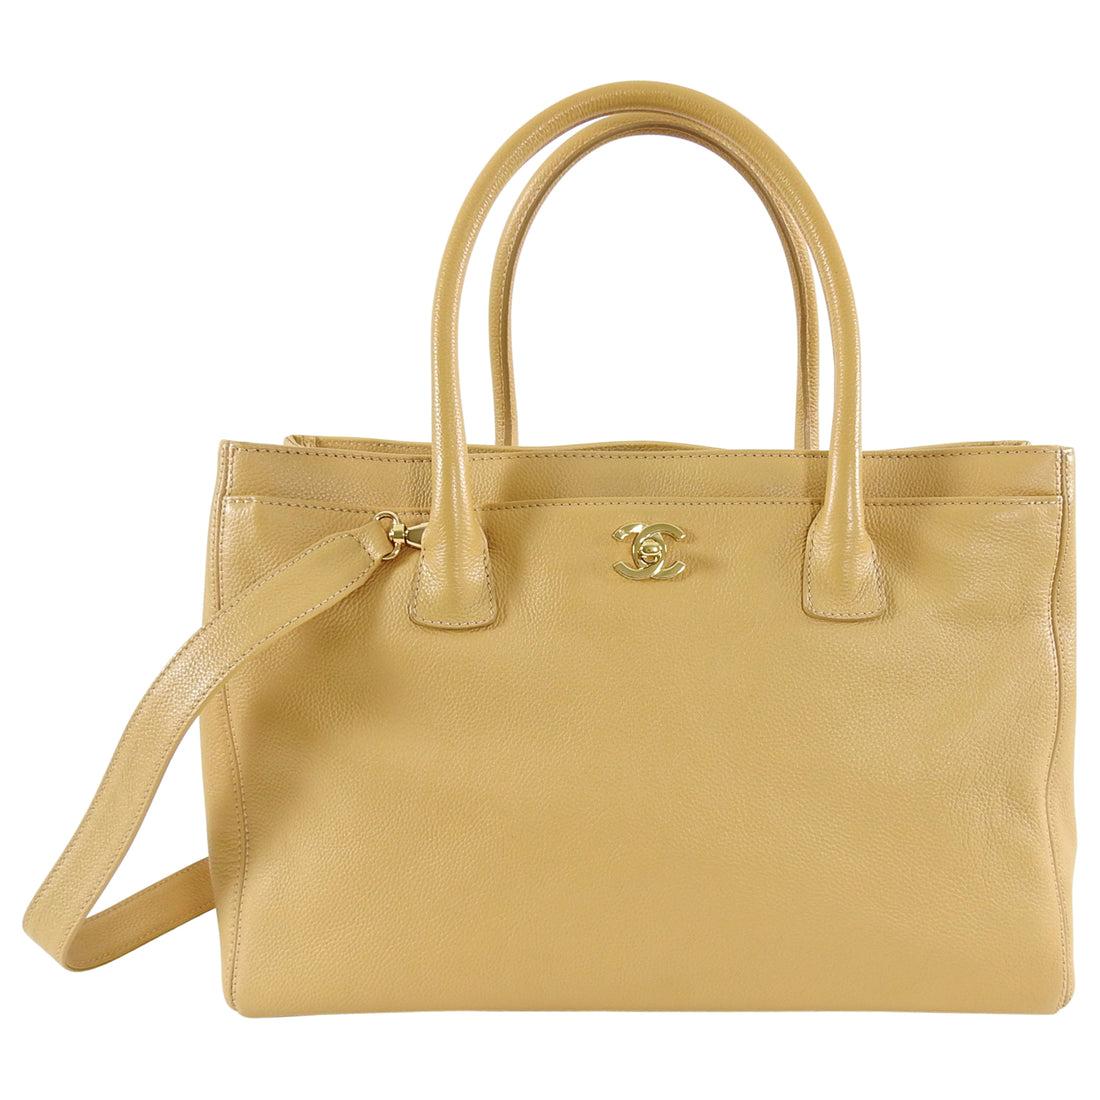 Chanel Beige Leather Executive Cerf Tote Bag